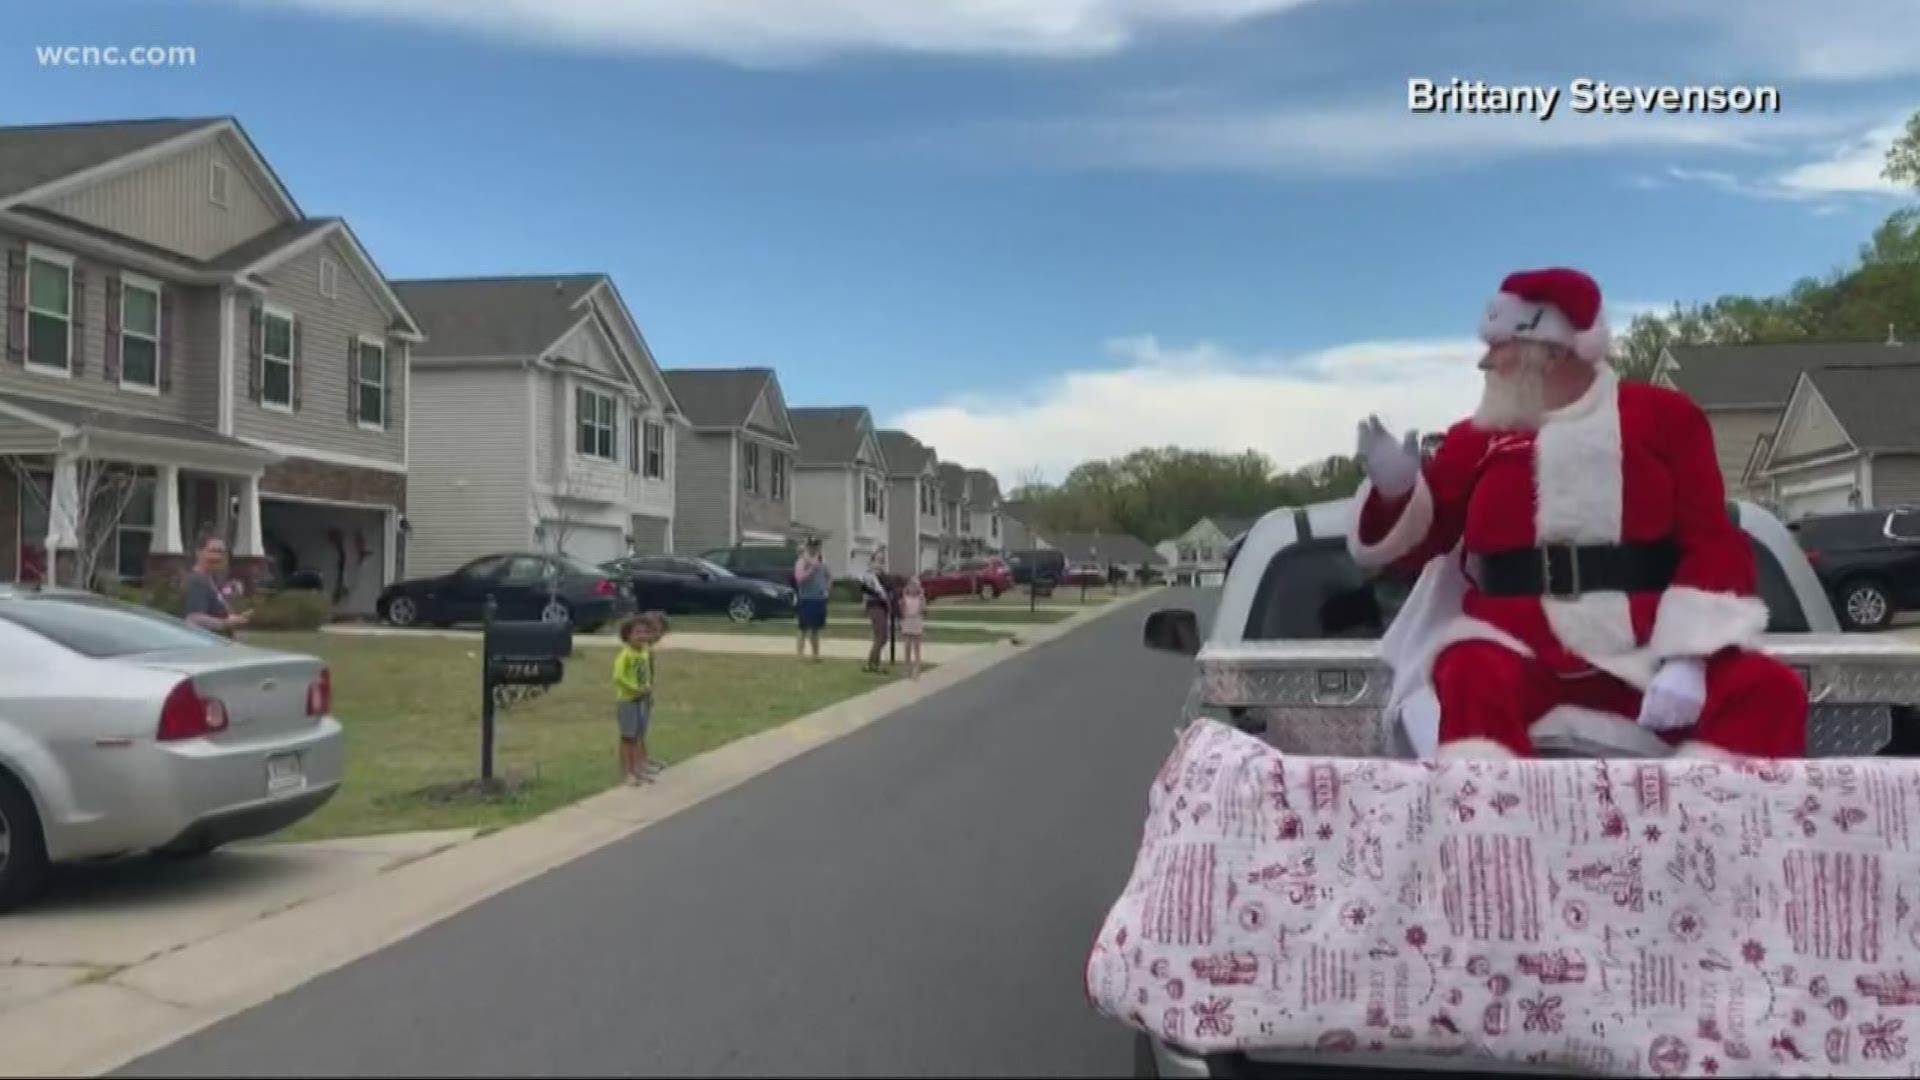 Santa practiced social distancing, taking a ride down the streets in the back of pickup truck.